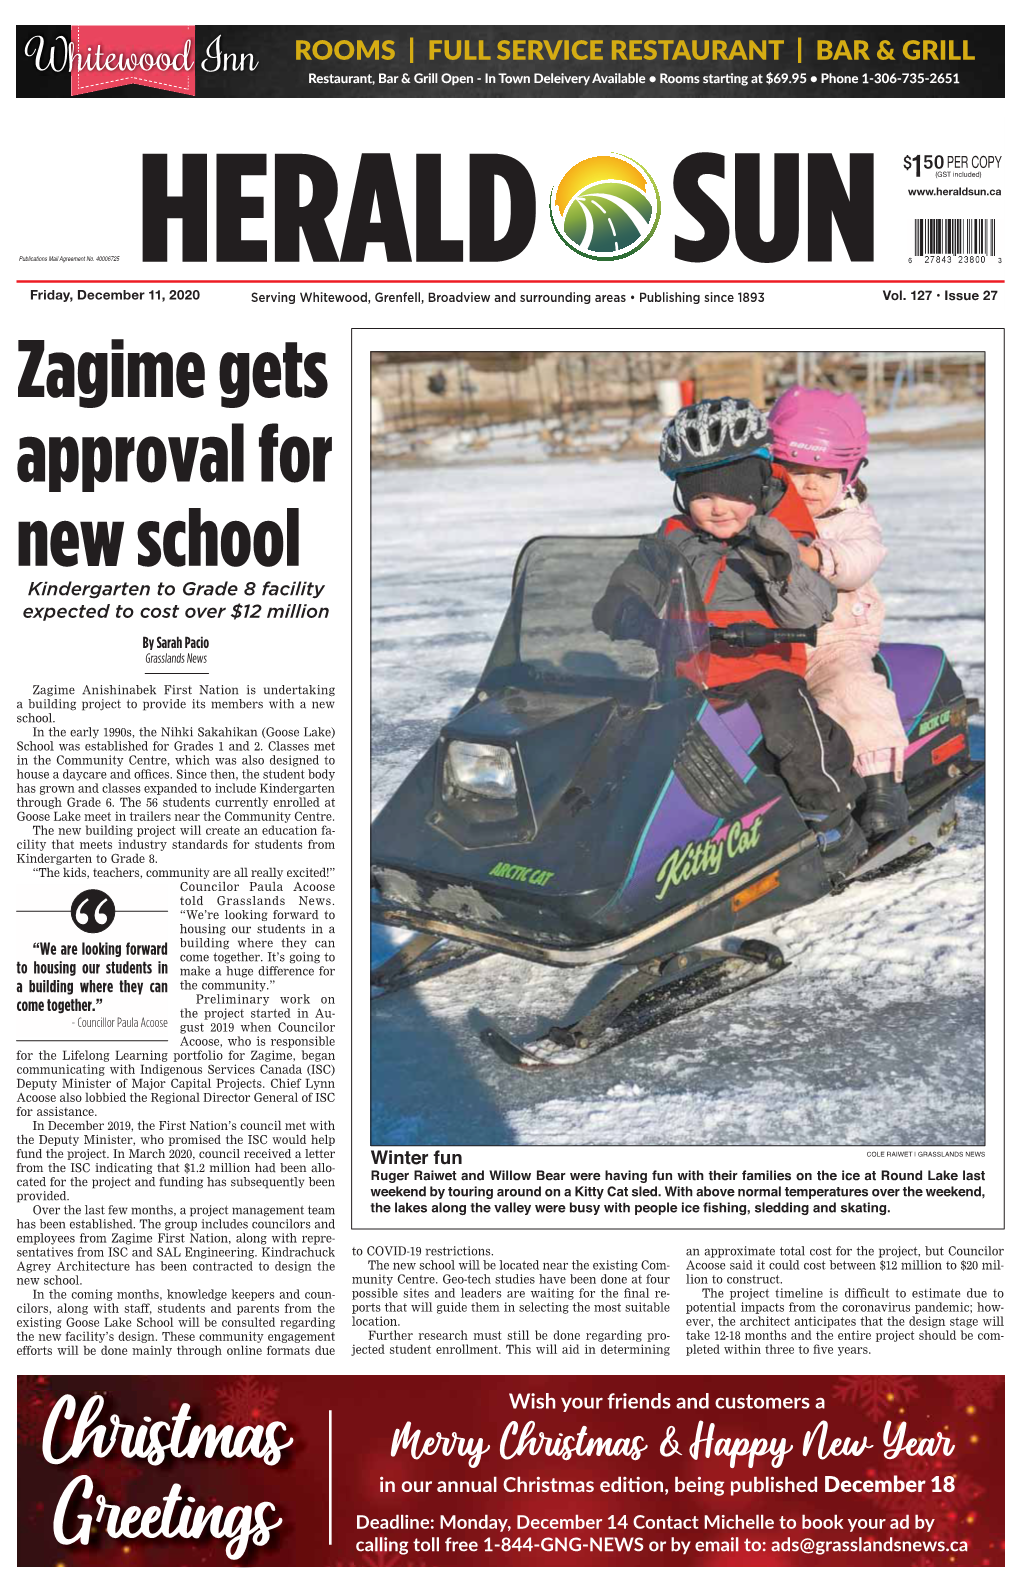 Zagime Gets Approval for New School Kindergarten to Grade 8 Facility Expected to Cost Over $12 Million by Sarah Pacio Grasslands News